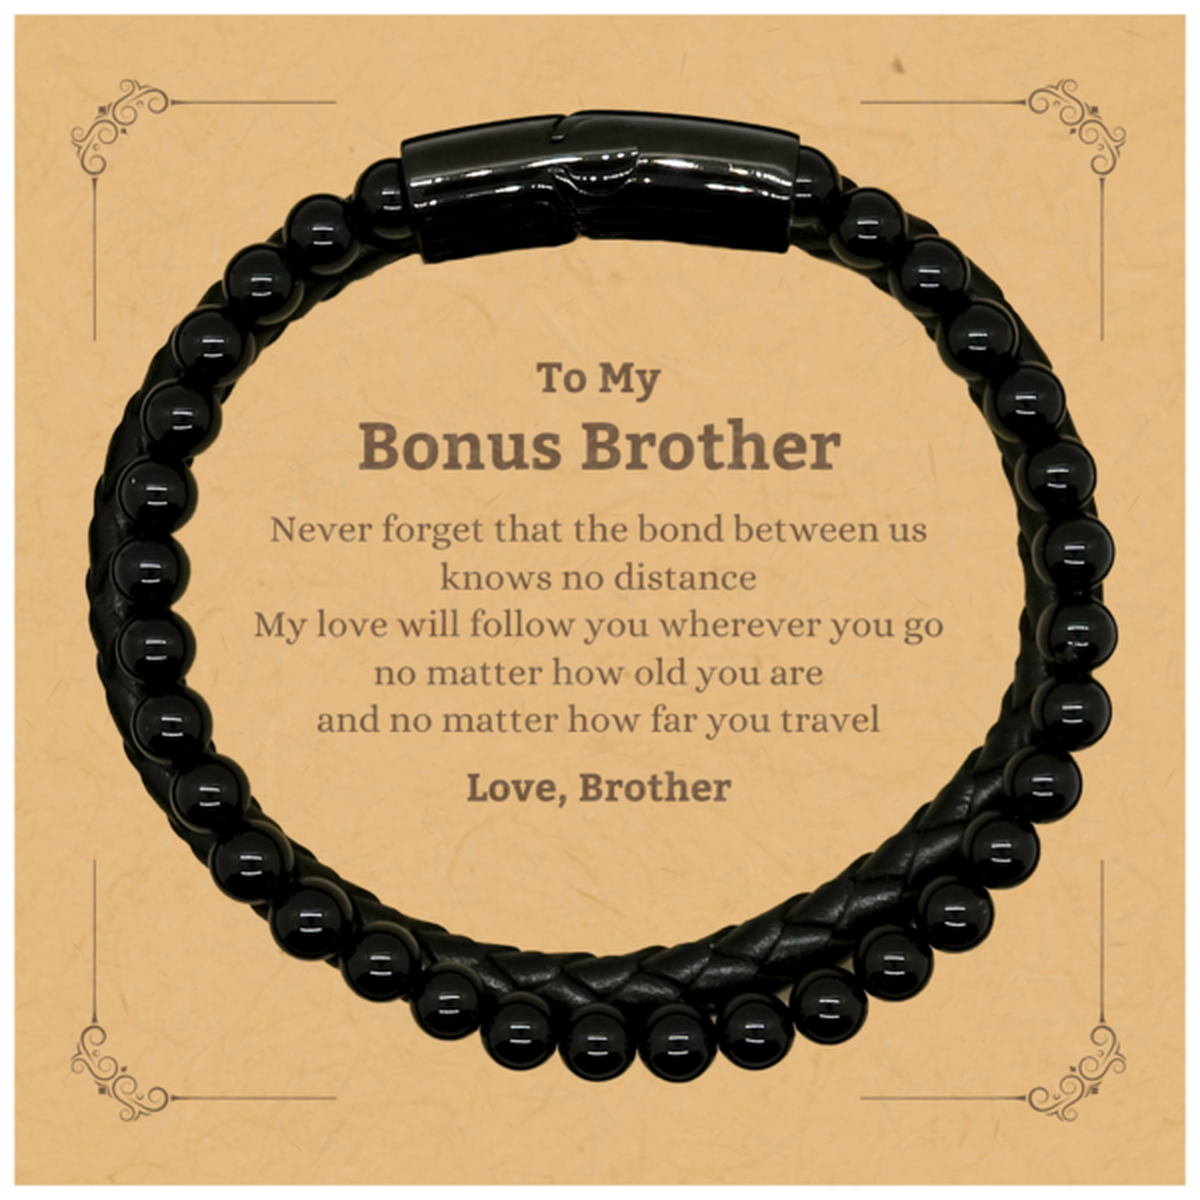 Bonus Brother Birthday Gifts from Brother, Adjustable Stone Leather Bracelets for Bonus Brother Christmas Graduation Unique Gifts Bonus Brother Never forget that the bond between us knows no distance. Love, Brother